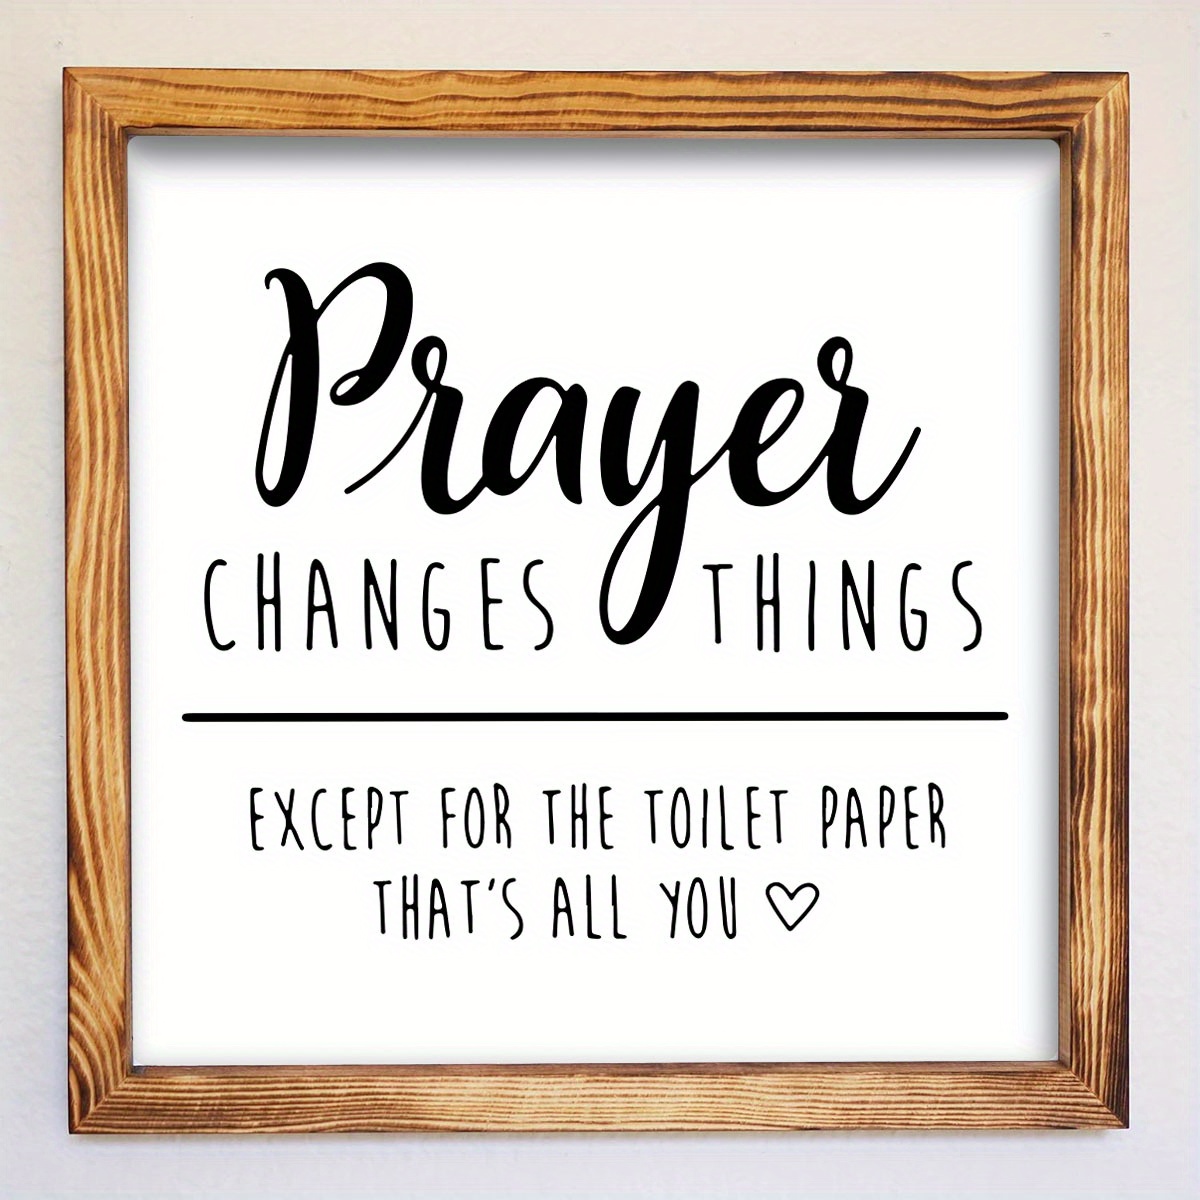 

1pc, Rustic Wooden "prayer Changes Things" Quote Sign, Farmhouse Wall Art Decor For Bathroom With Humorous Message, Vintage Style Hanging Frame